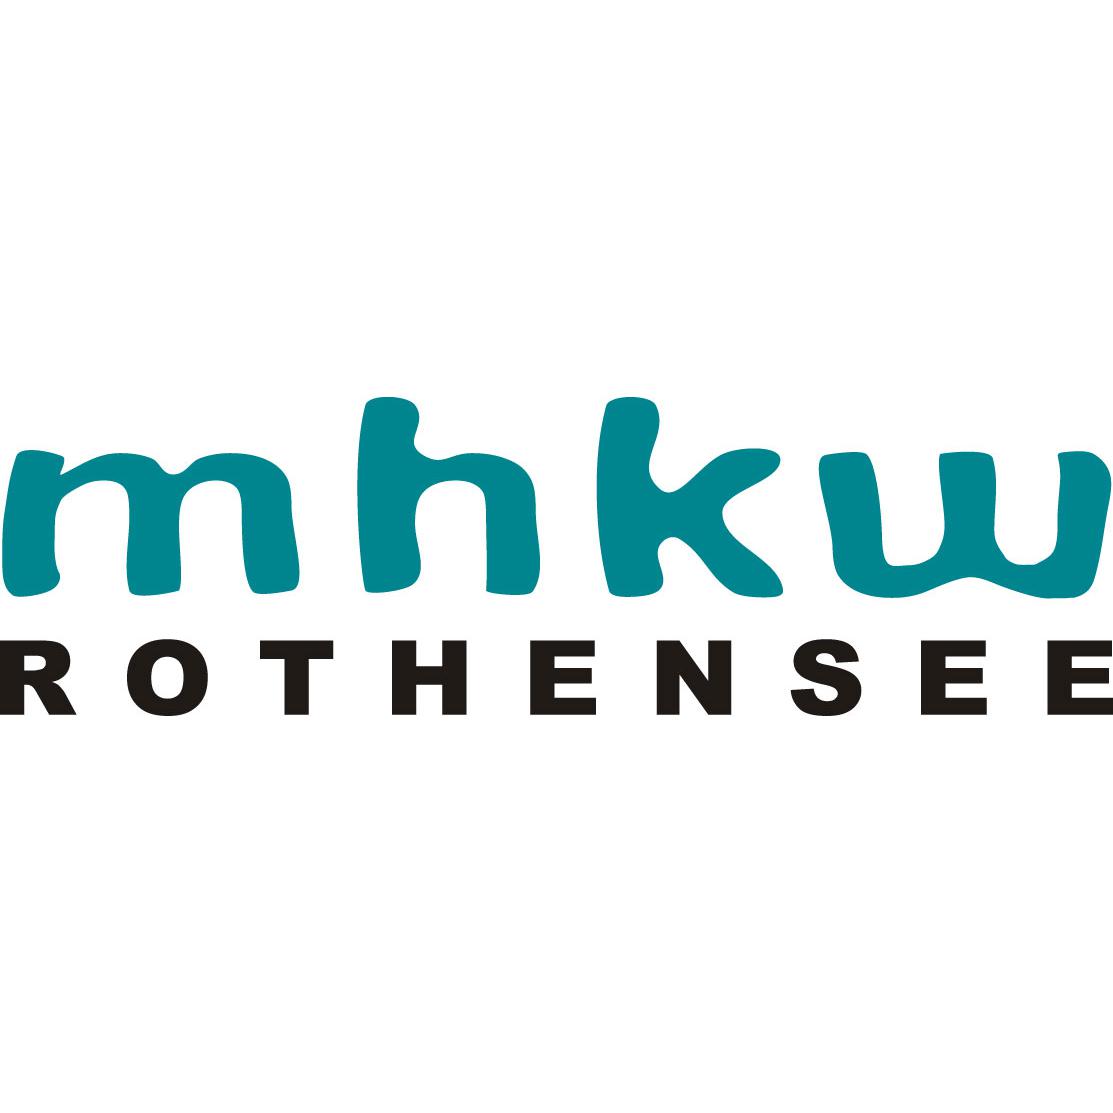 MHKW Rothensee GmbH in Magdeburg - Logo